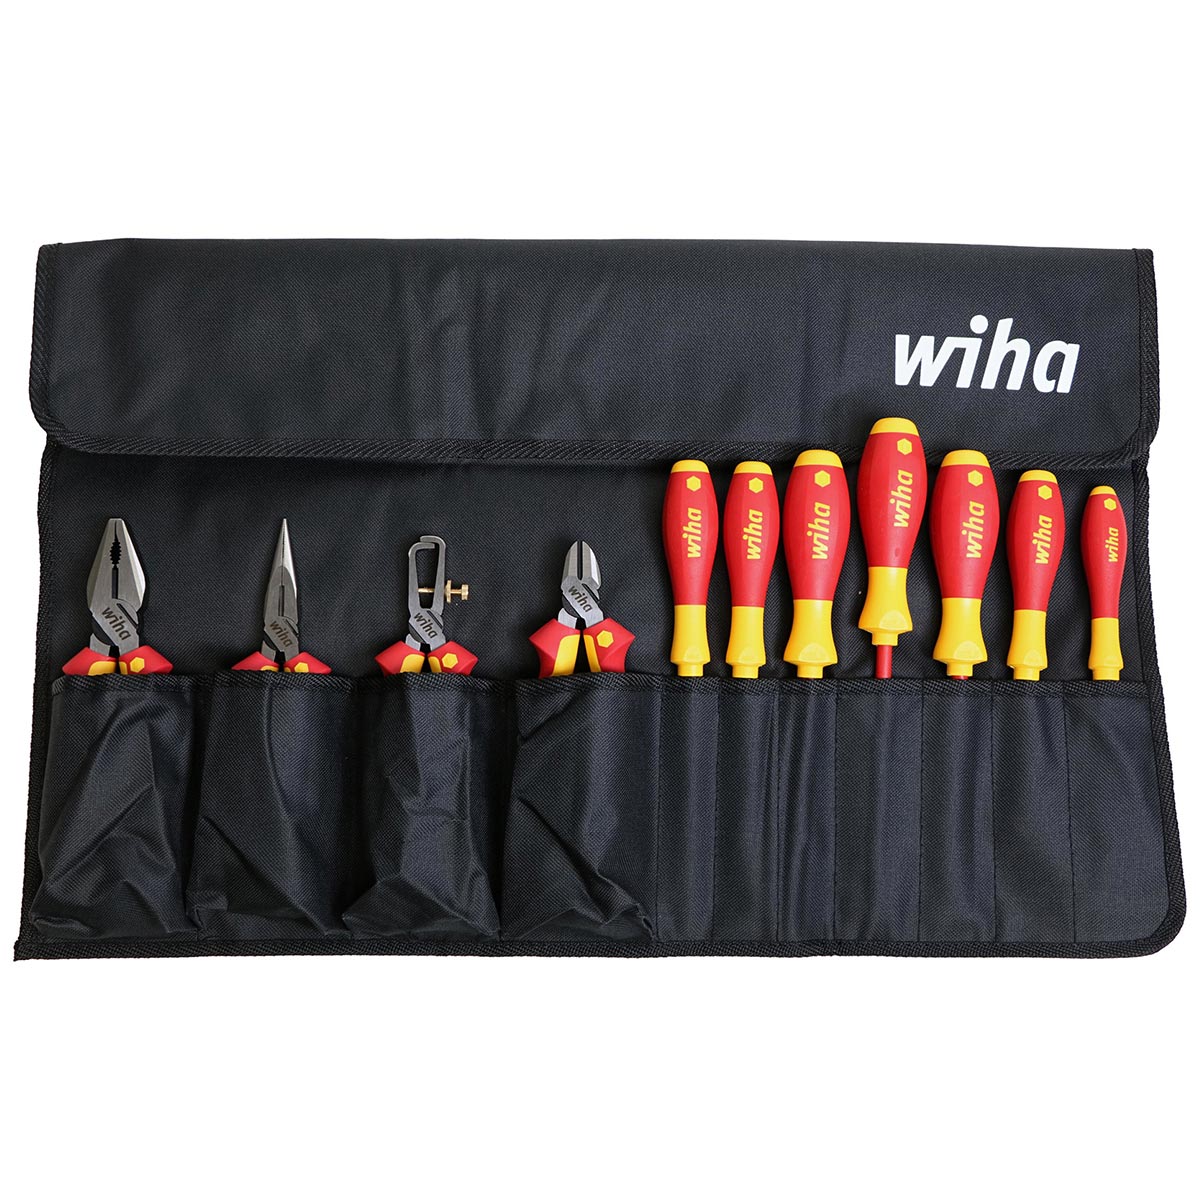 Wiha Insulated Industrial Pliers and Screwdriver Set - 11 Piece Set